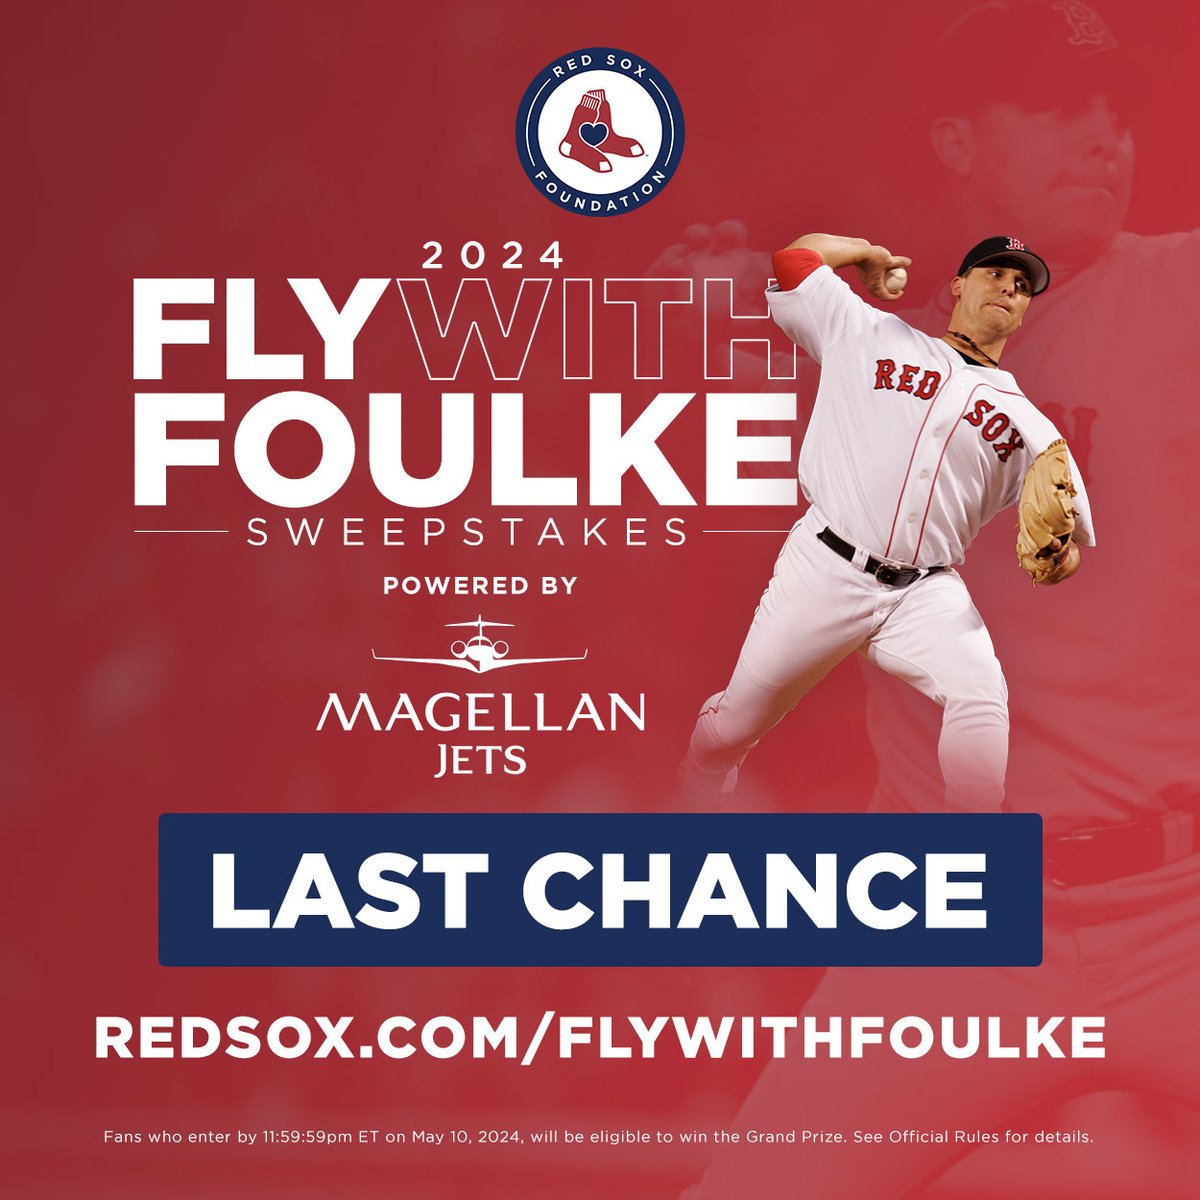 Last call to enter the Fly With Foulke Sweepstakes! Don't miss out on this once-in-a-lifetime experience: redsox.com/flywithfoulke